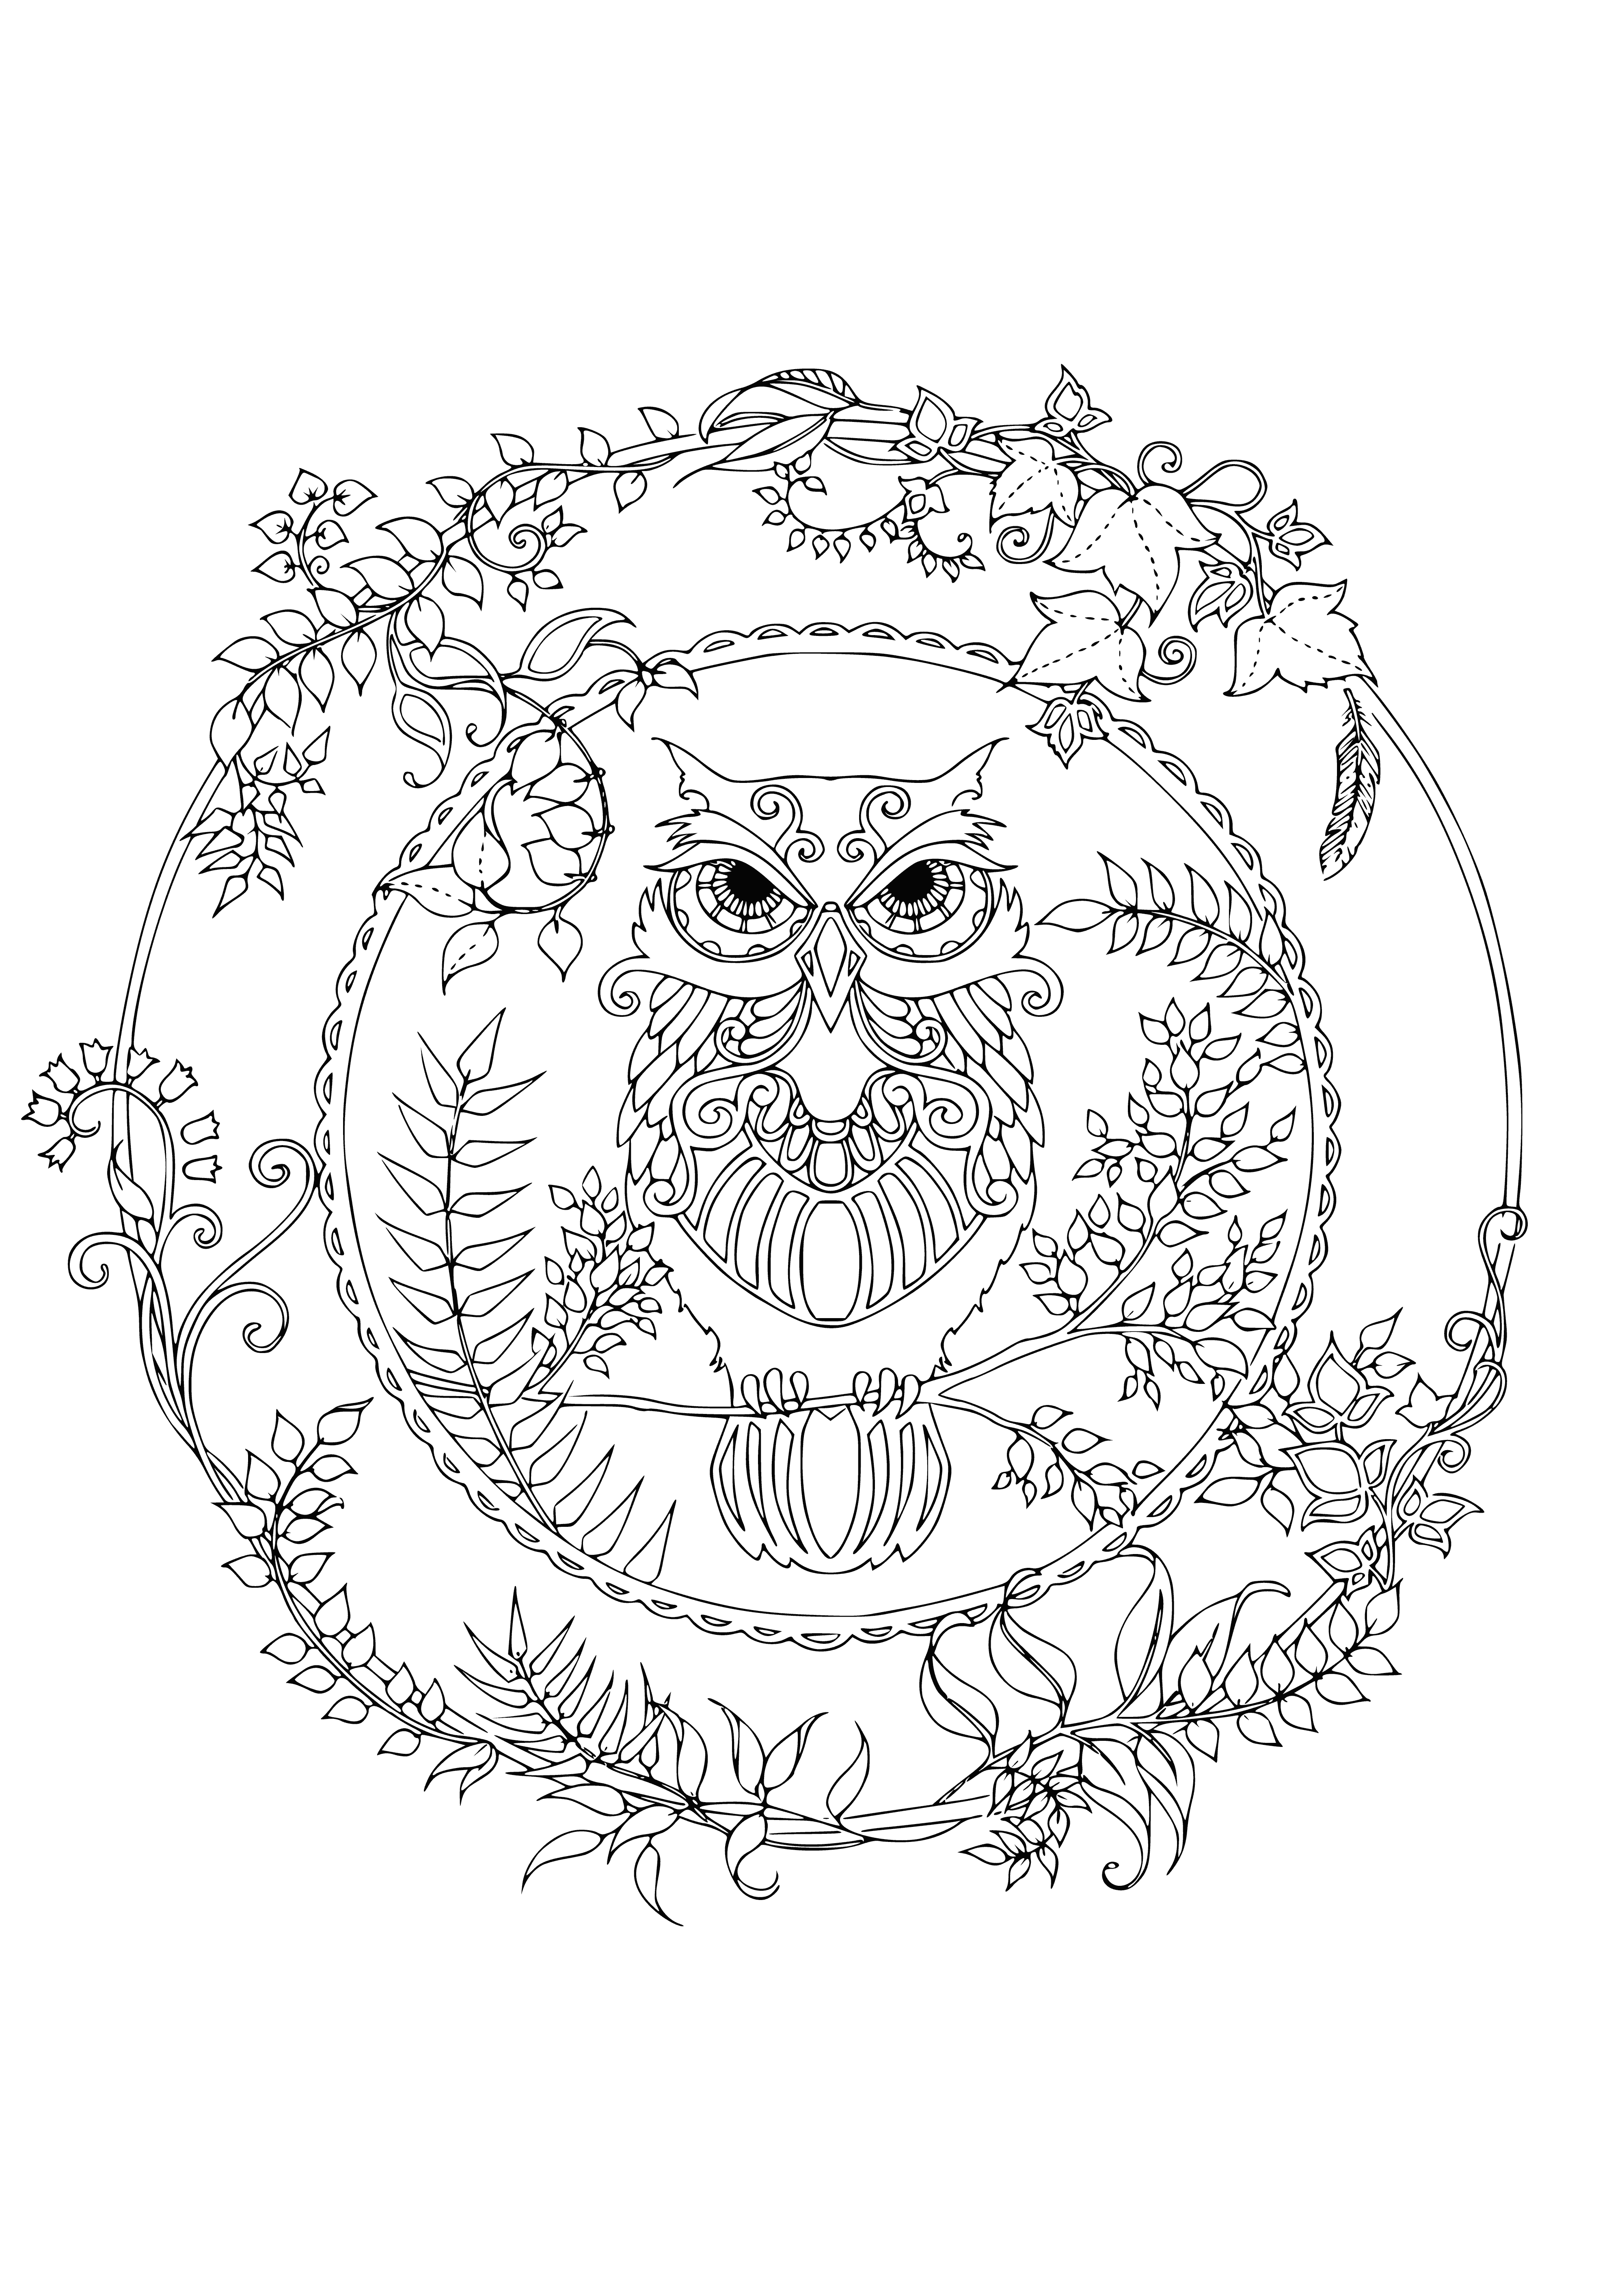 coloring page: Intricate owl mandala formed of geometric shapes and earth tones w/ wings outstretched & leaves/branches.